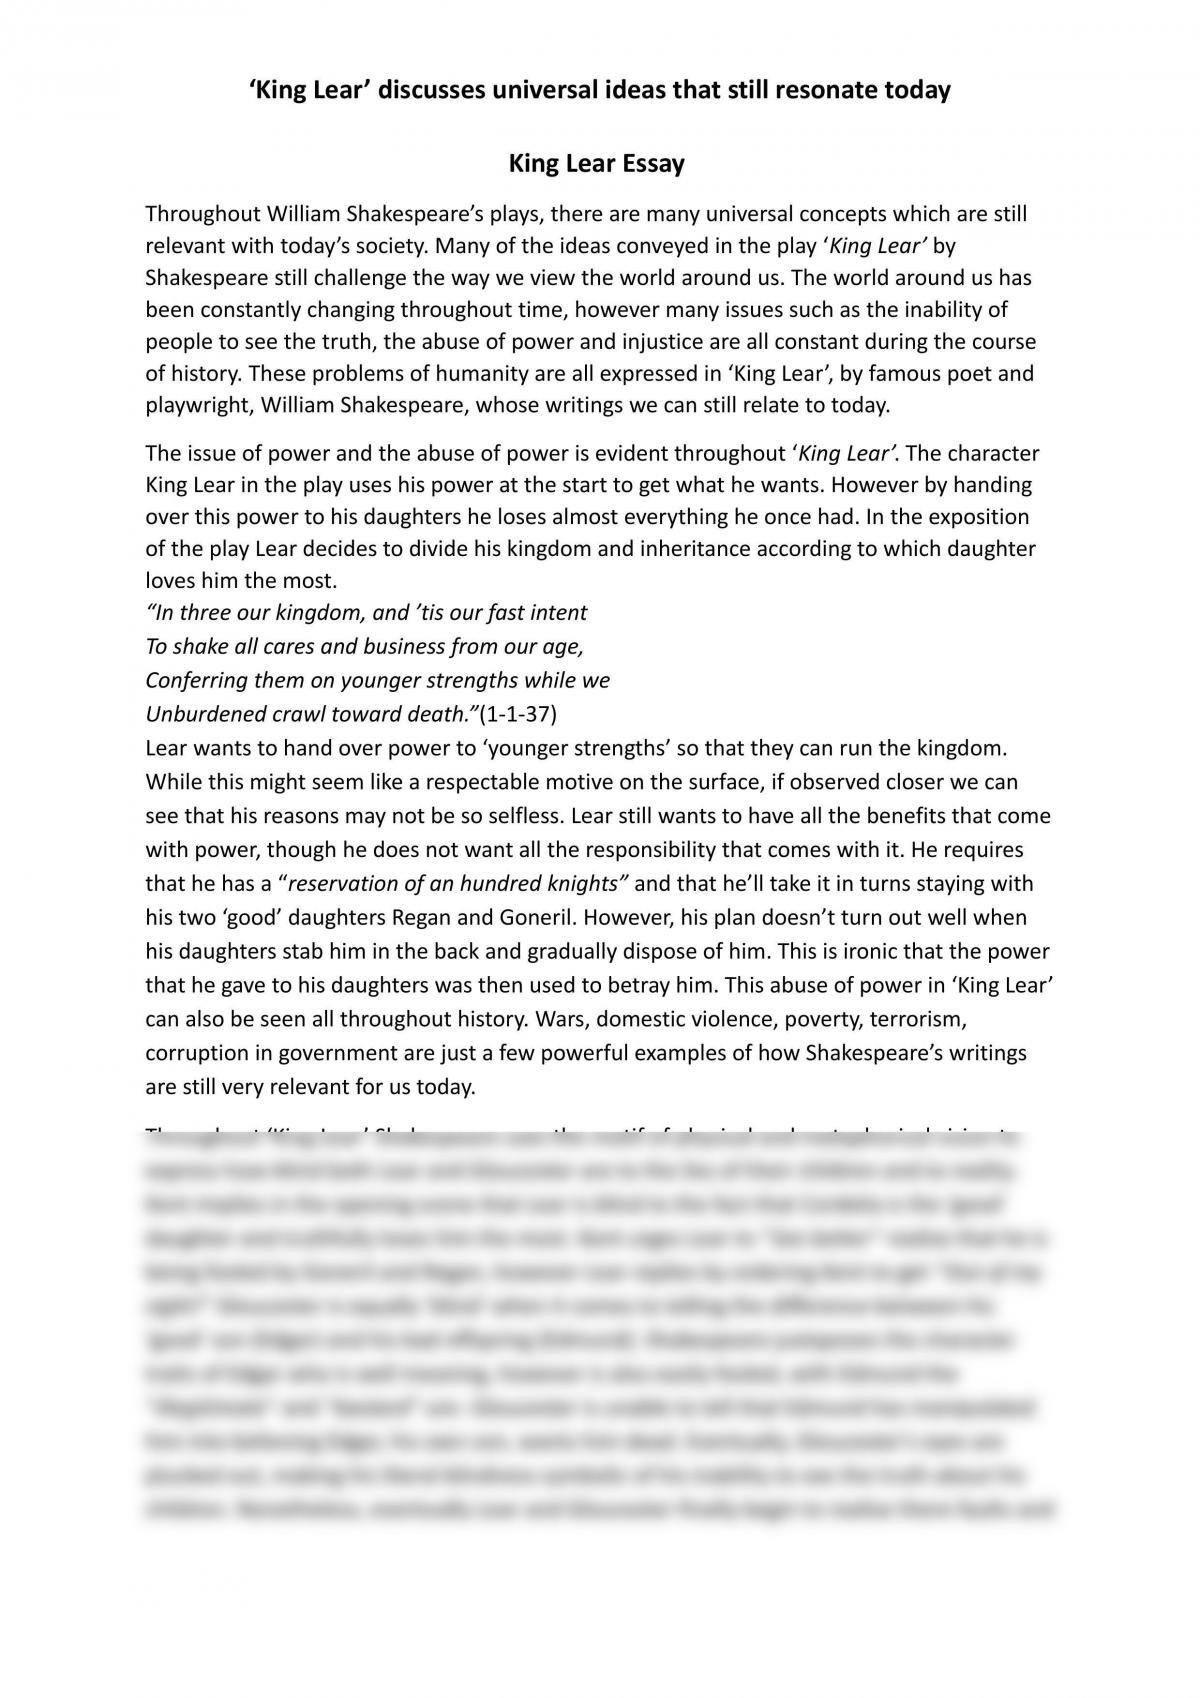 Реферат: King Lear Essay Research Paper Many of